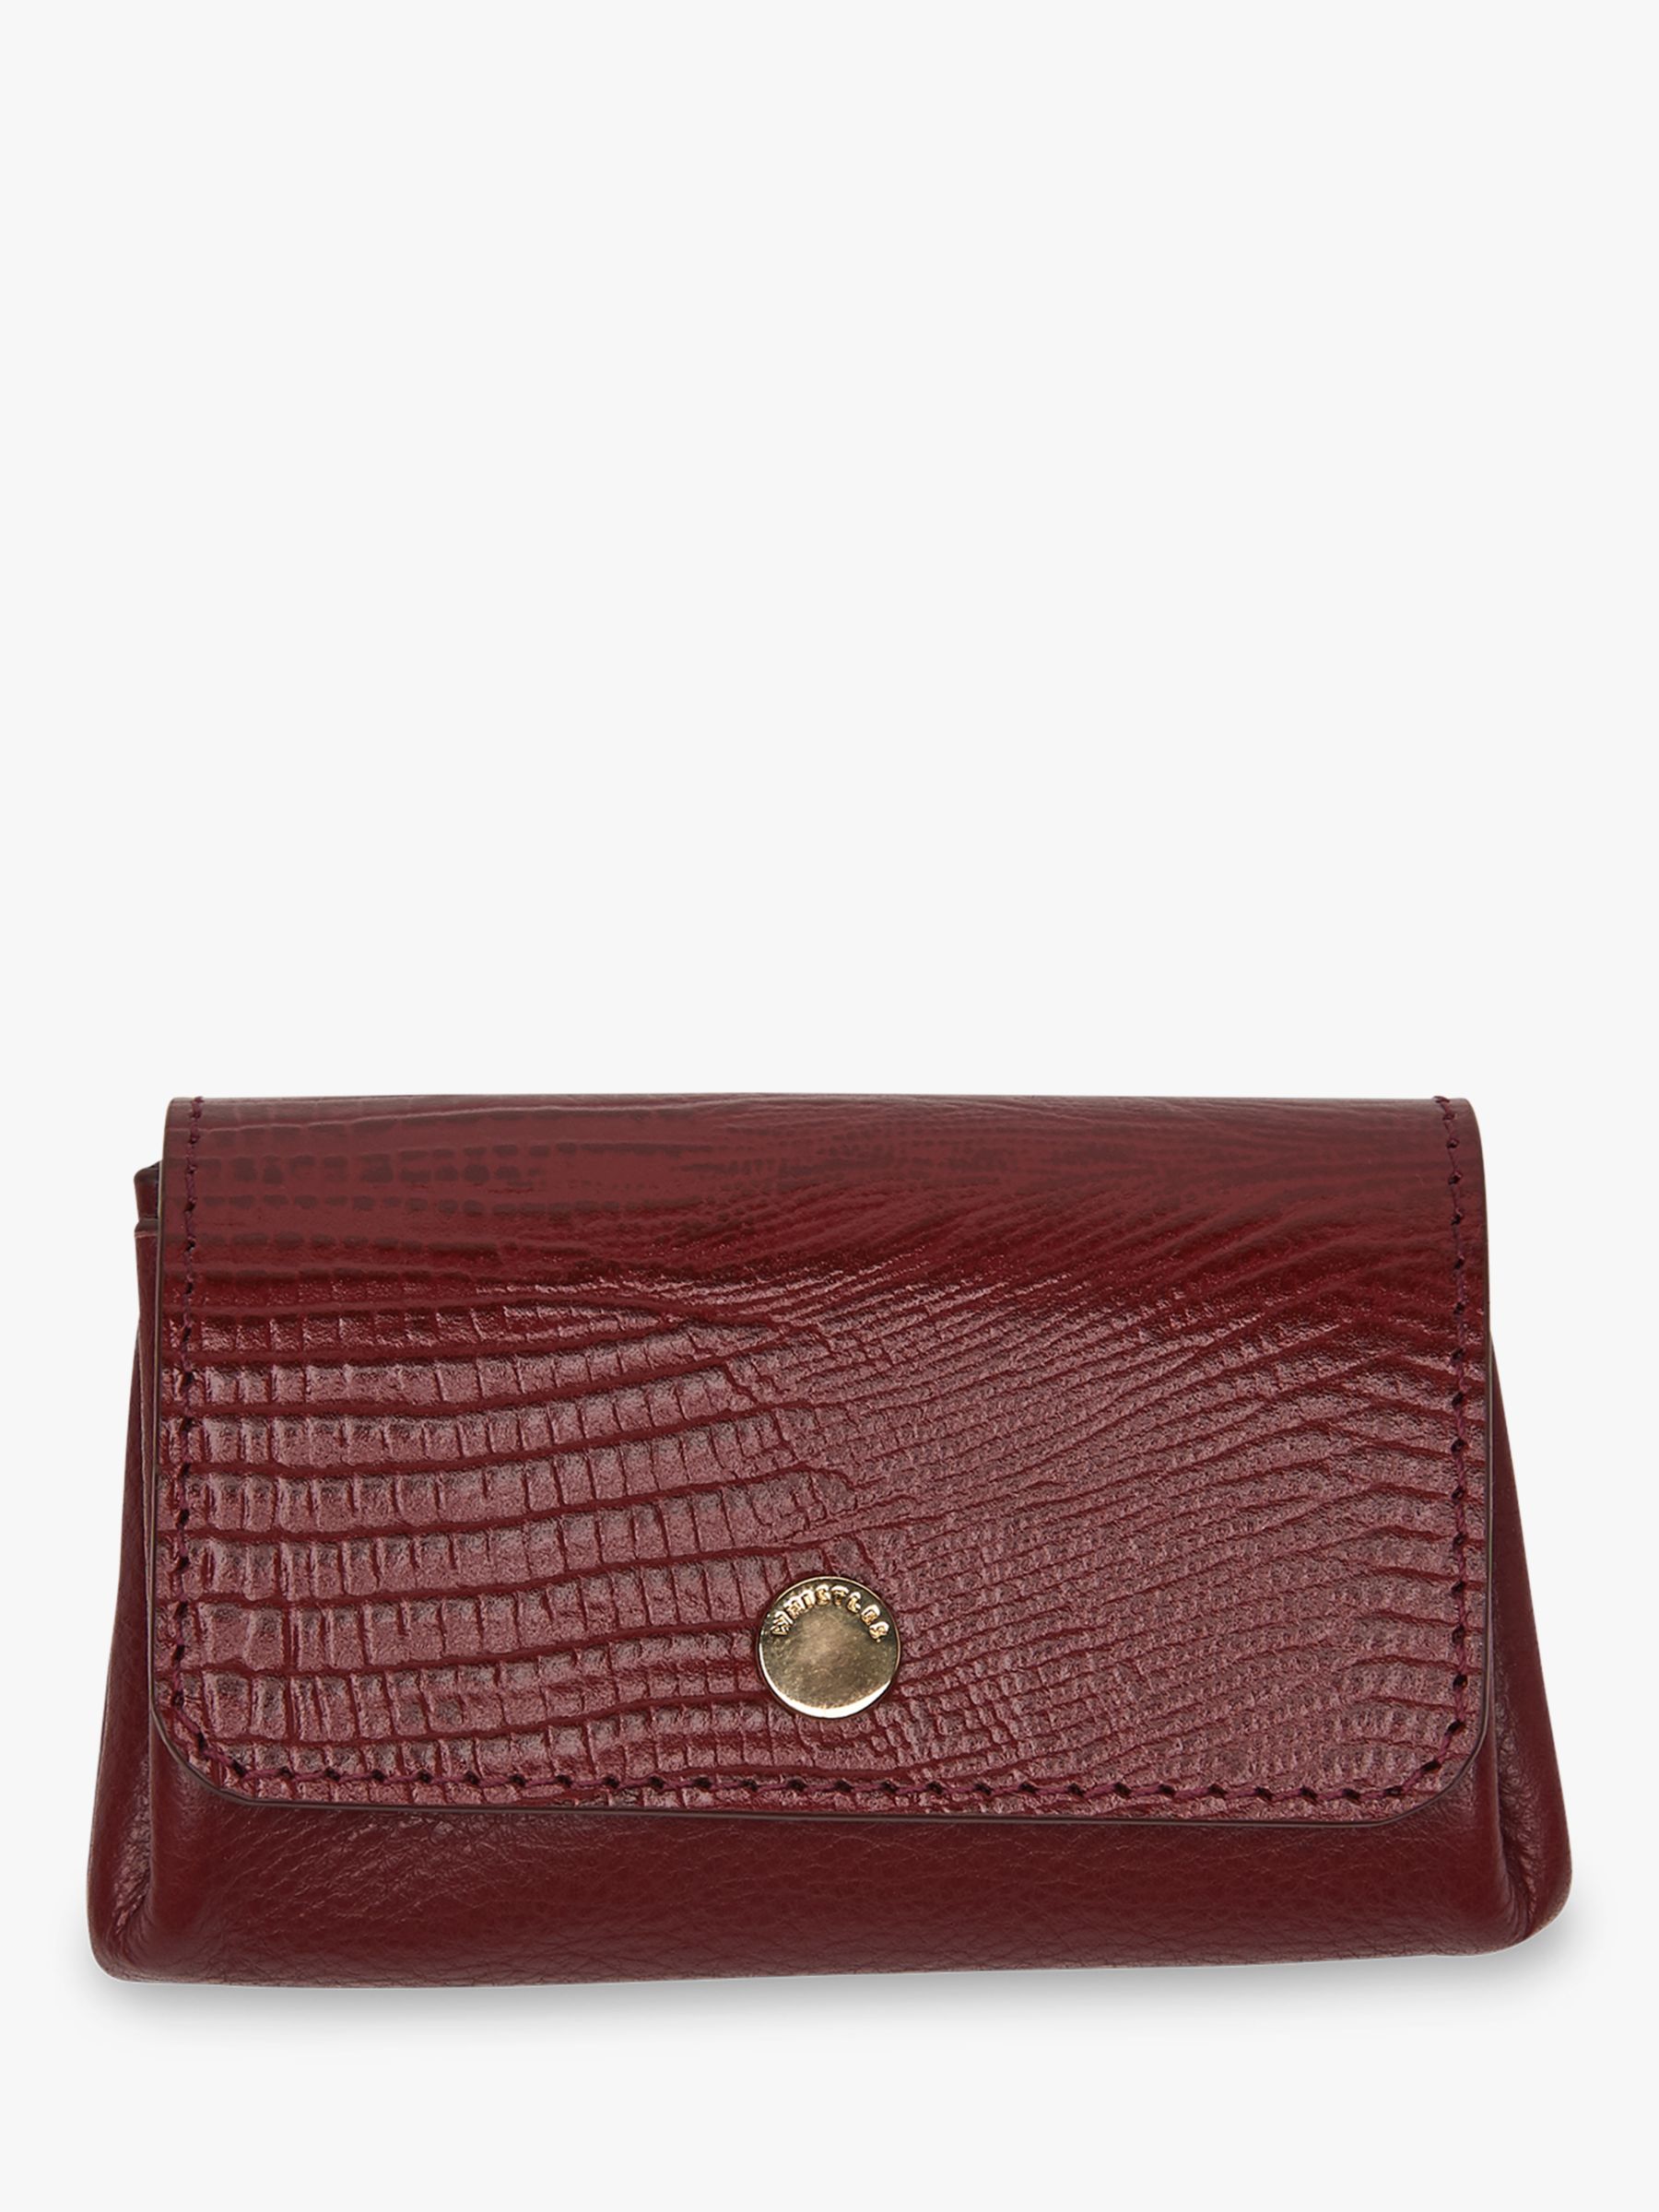 Whistles Emmy Lizard Leather Coin Purse, Burgundy